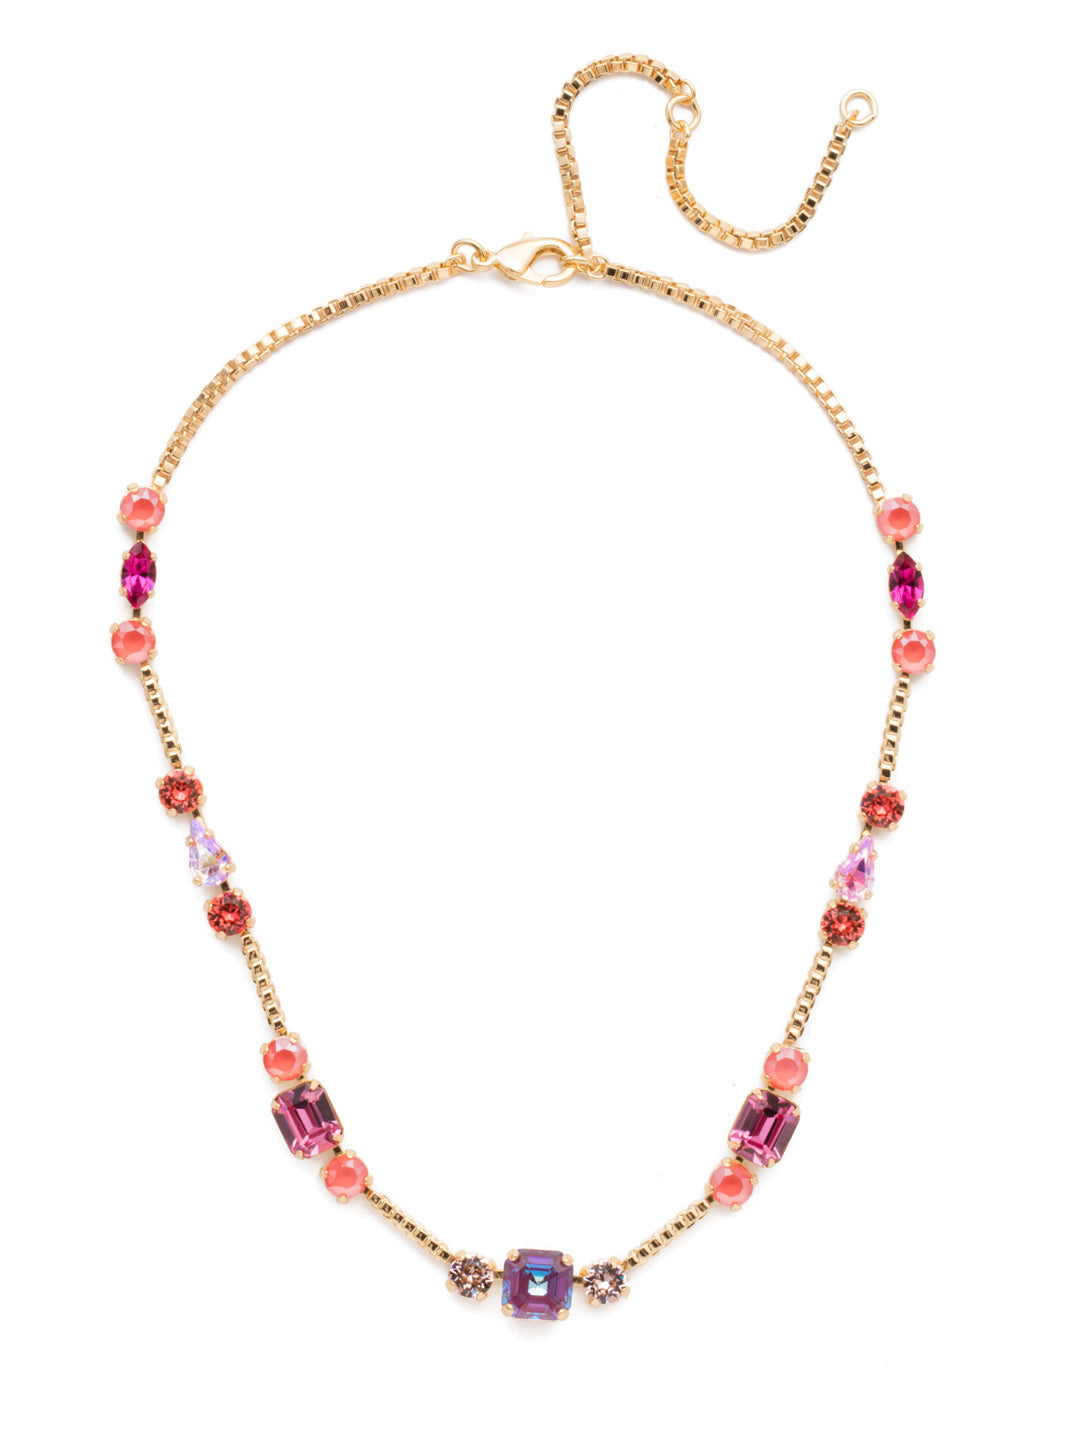 Poppy Tennis Necklace - NEN18BGBGA - <p>The Poppy Tennis Necklace is anything but ordinary. Wear it all when you combine classic, baguette and navette sparklers. It's structured and sophisticated. From Sorrelli's Begonia collection in our Bright Gold-tone finish.</p>